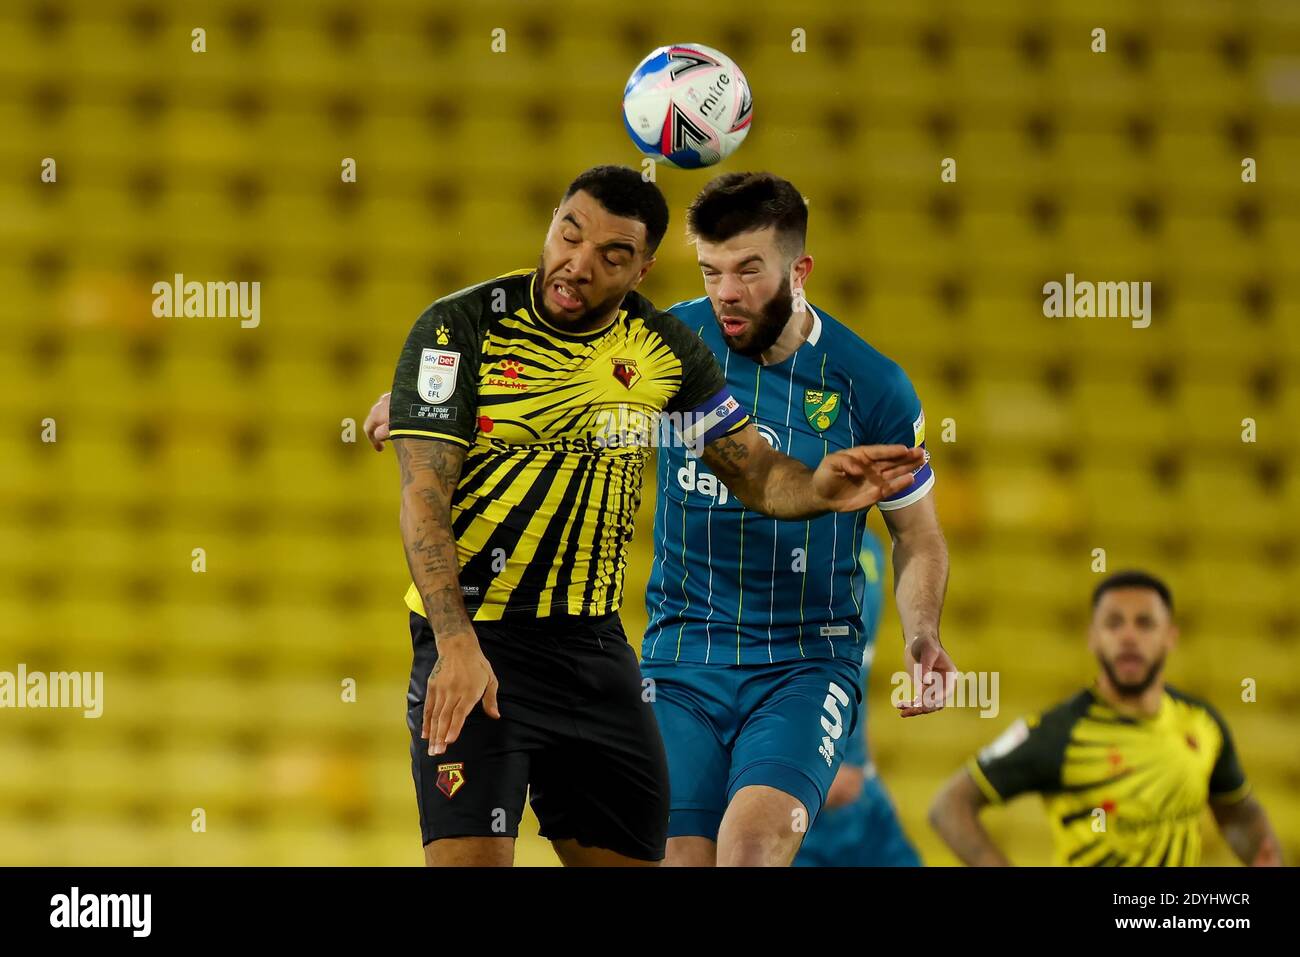 Vicarage Road, Watford, Hertfordshire, UK. 26th Dec, 2020. English Football League Championship Football, Watford versus Norwich City; Grant Hanley of Norwich City wins a header against Troy Deeney of Watford Credit: Action Plus Sports/Alamy Live News Stock Photo